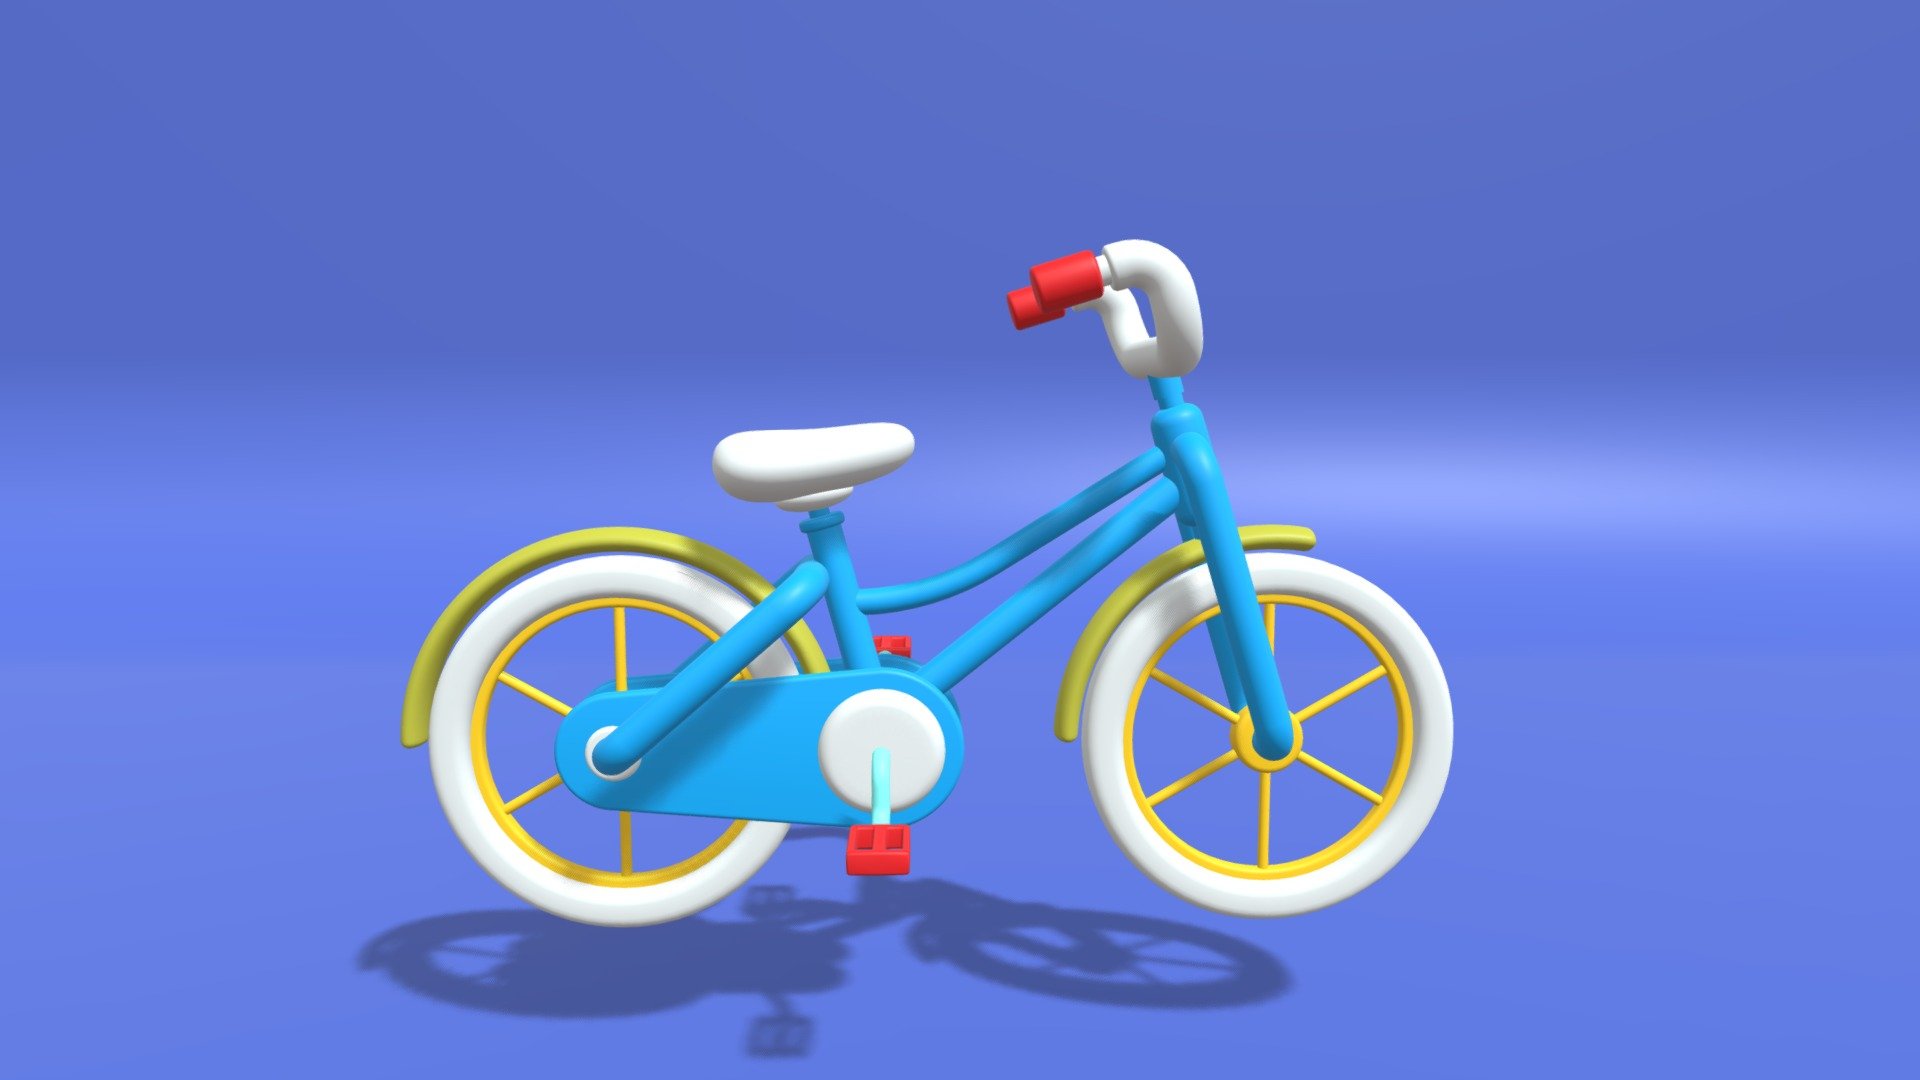 -Cartoon Cute Bicycle.

-Contains 14 objects.

-Verts : 30,868 Faces : 30,042.

-Materials have the correct names.

-This product was created in Blender 2.8

-Formats: blend, fbx, obj, c4d, dae, abc, stl, glb,unitypackage.

-We hope you enjoy this model.

-Thank you 3d model